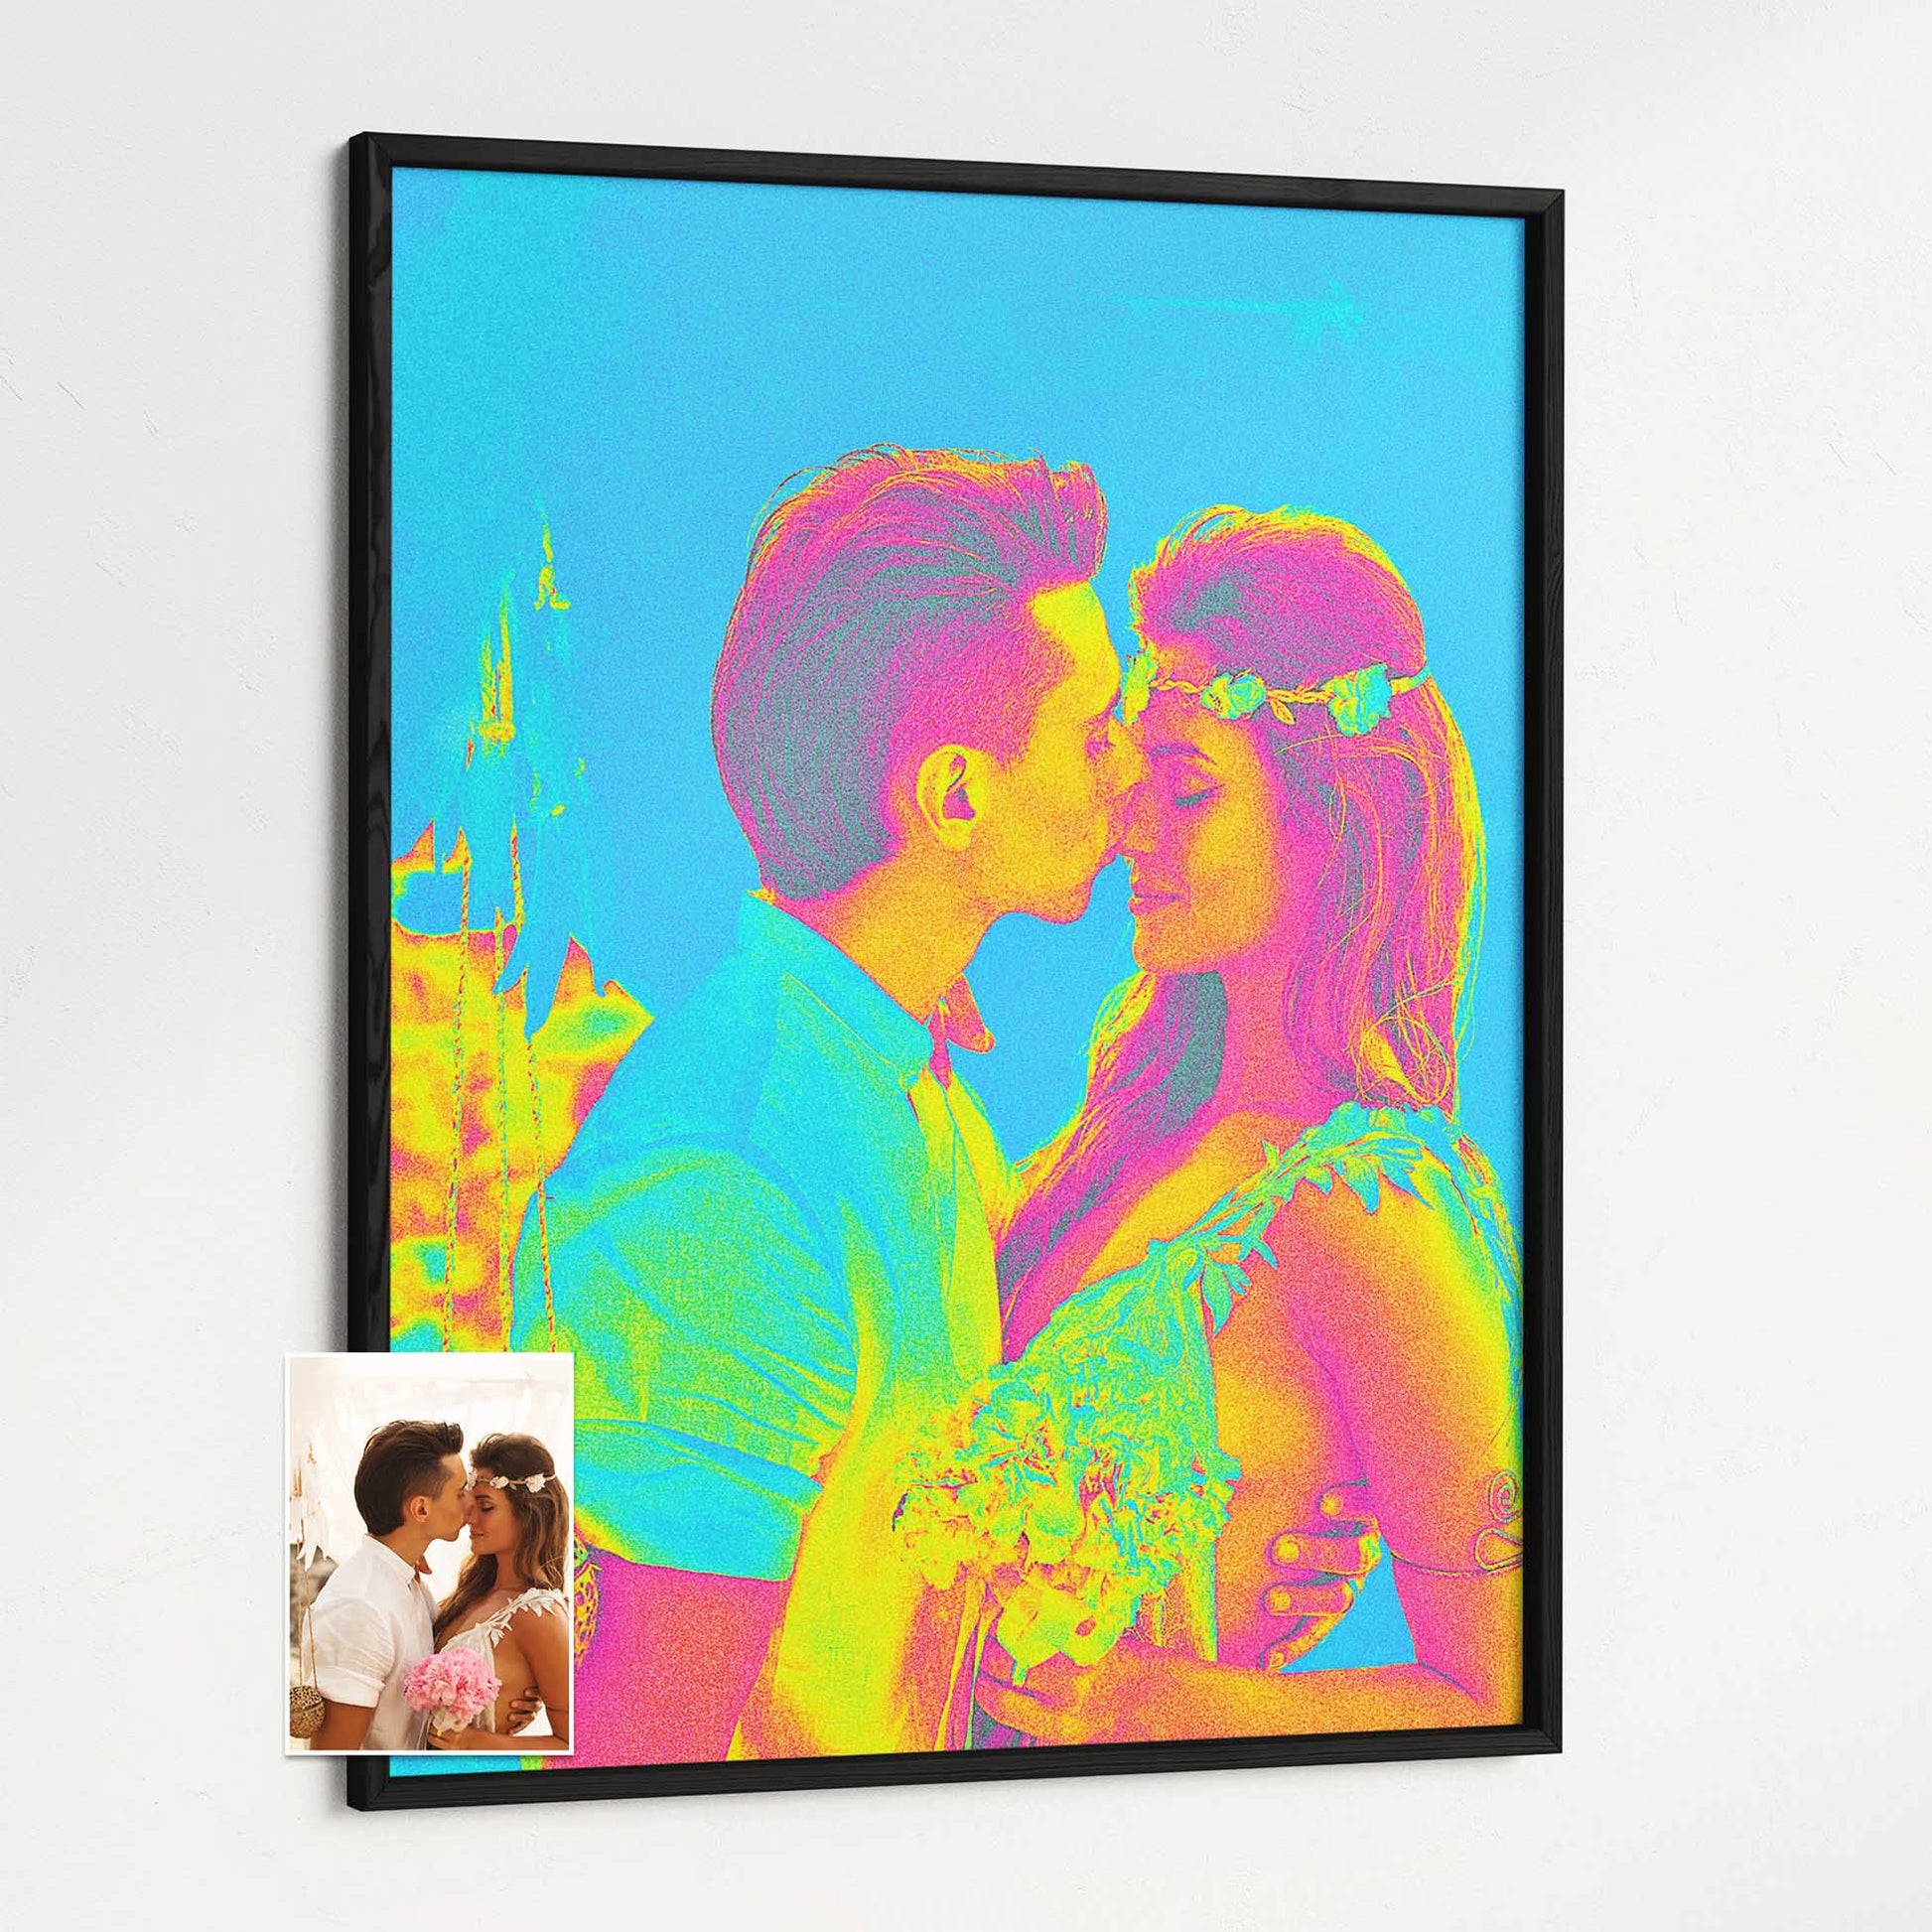 Personalised Acid Trip Framed Print is a must-have for art lovers seeking a unique and vibrant piece. This fine digital art features a colorful and vivid design that grabs attention and makes a bold statement